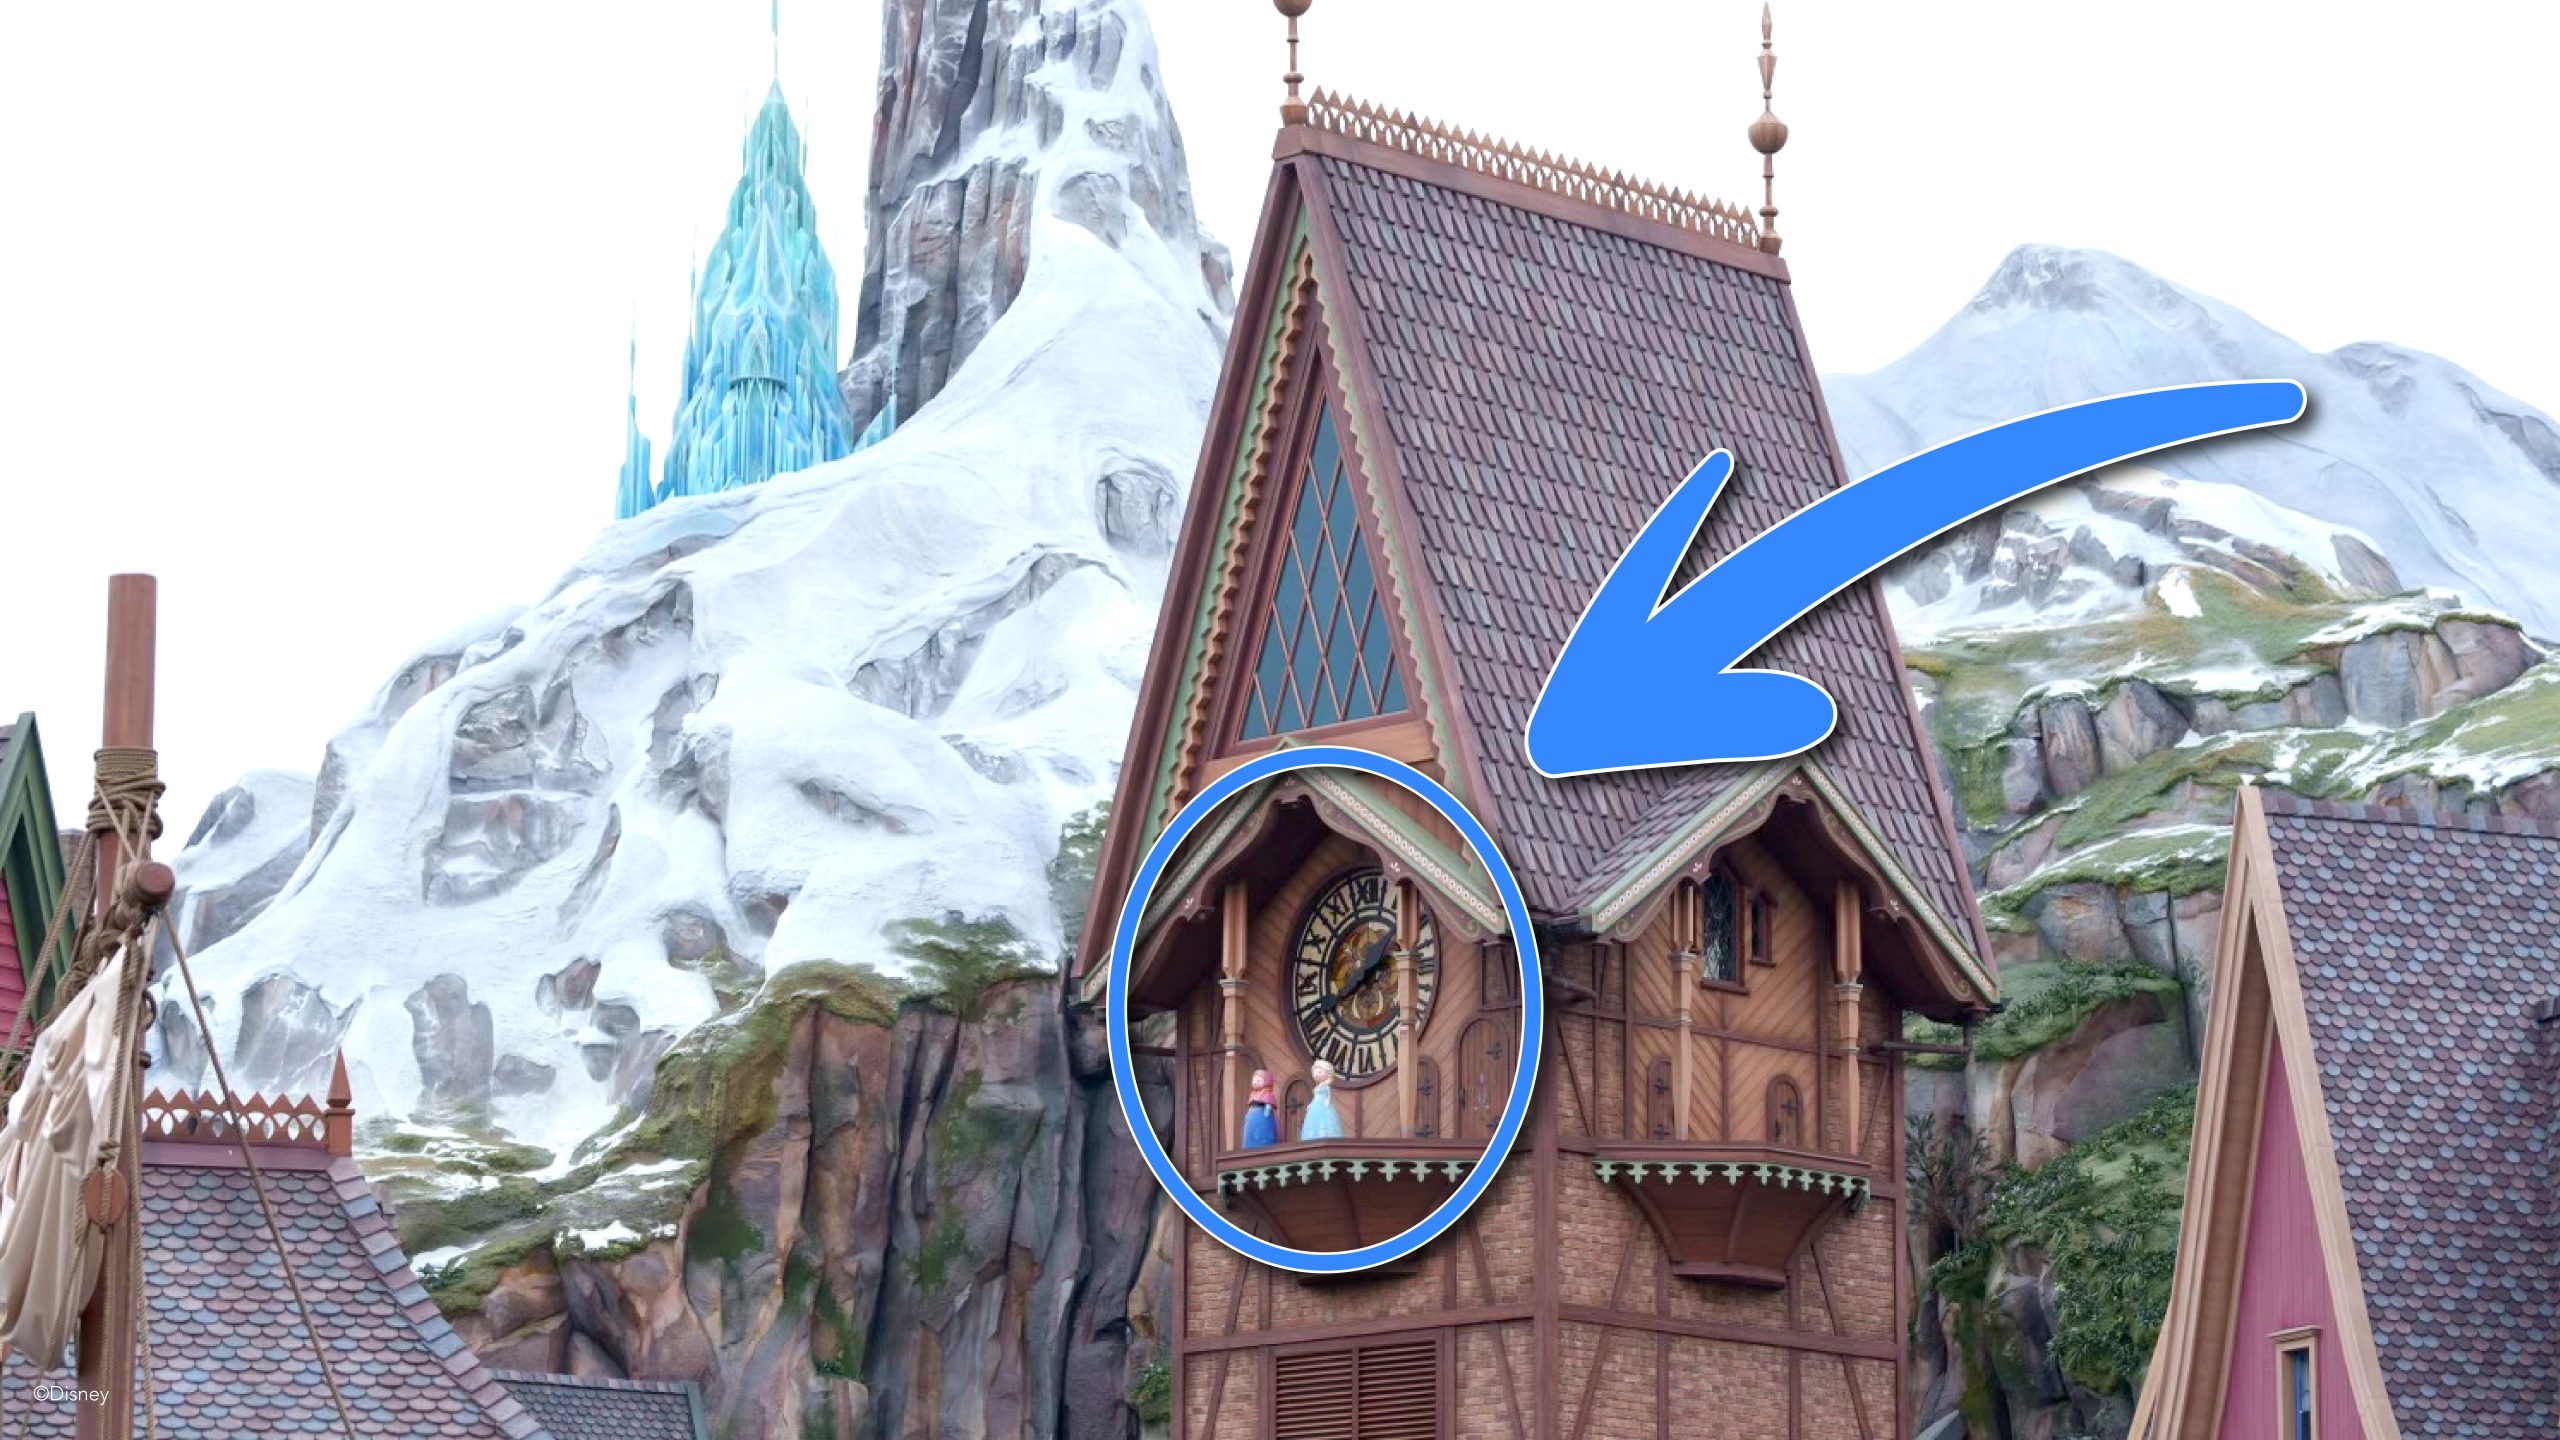 World of Frozen Easter Egg of Anna and Else on the Clock Tower at Hong Kong Disneyland